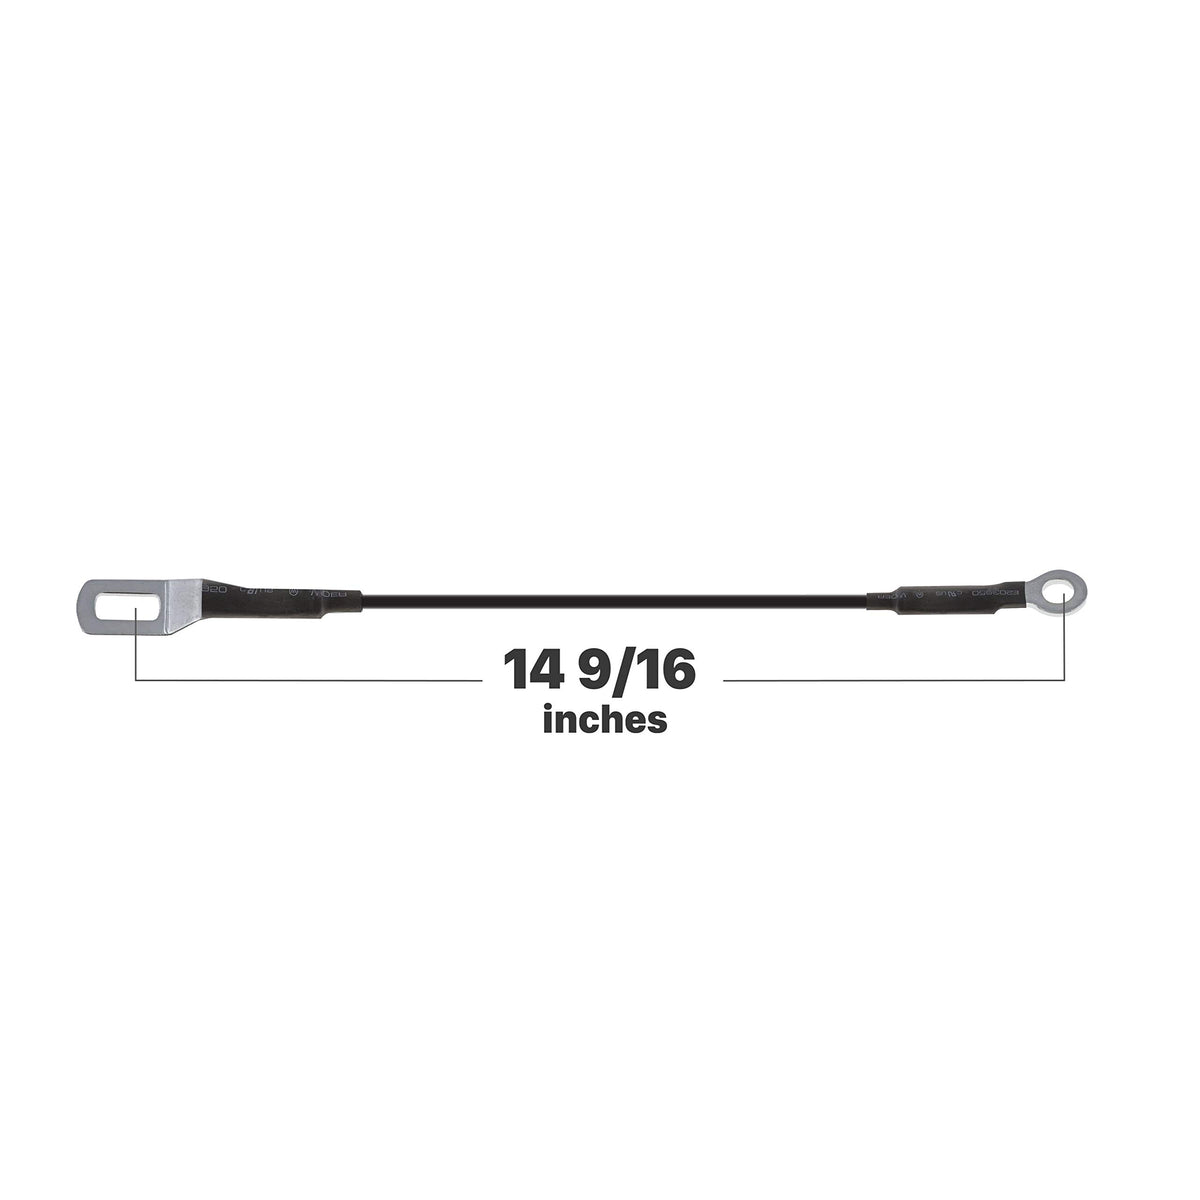 T1A Tailgate Support Cable Set Replacement for 1995-2003 Toyota Tacoma, Pair of Tailgate Straps for Left and Right Sides, 14-9/16" Long, 65770-04030